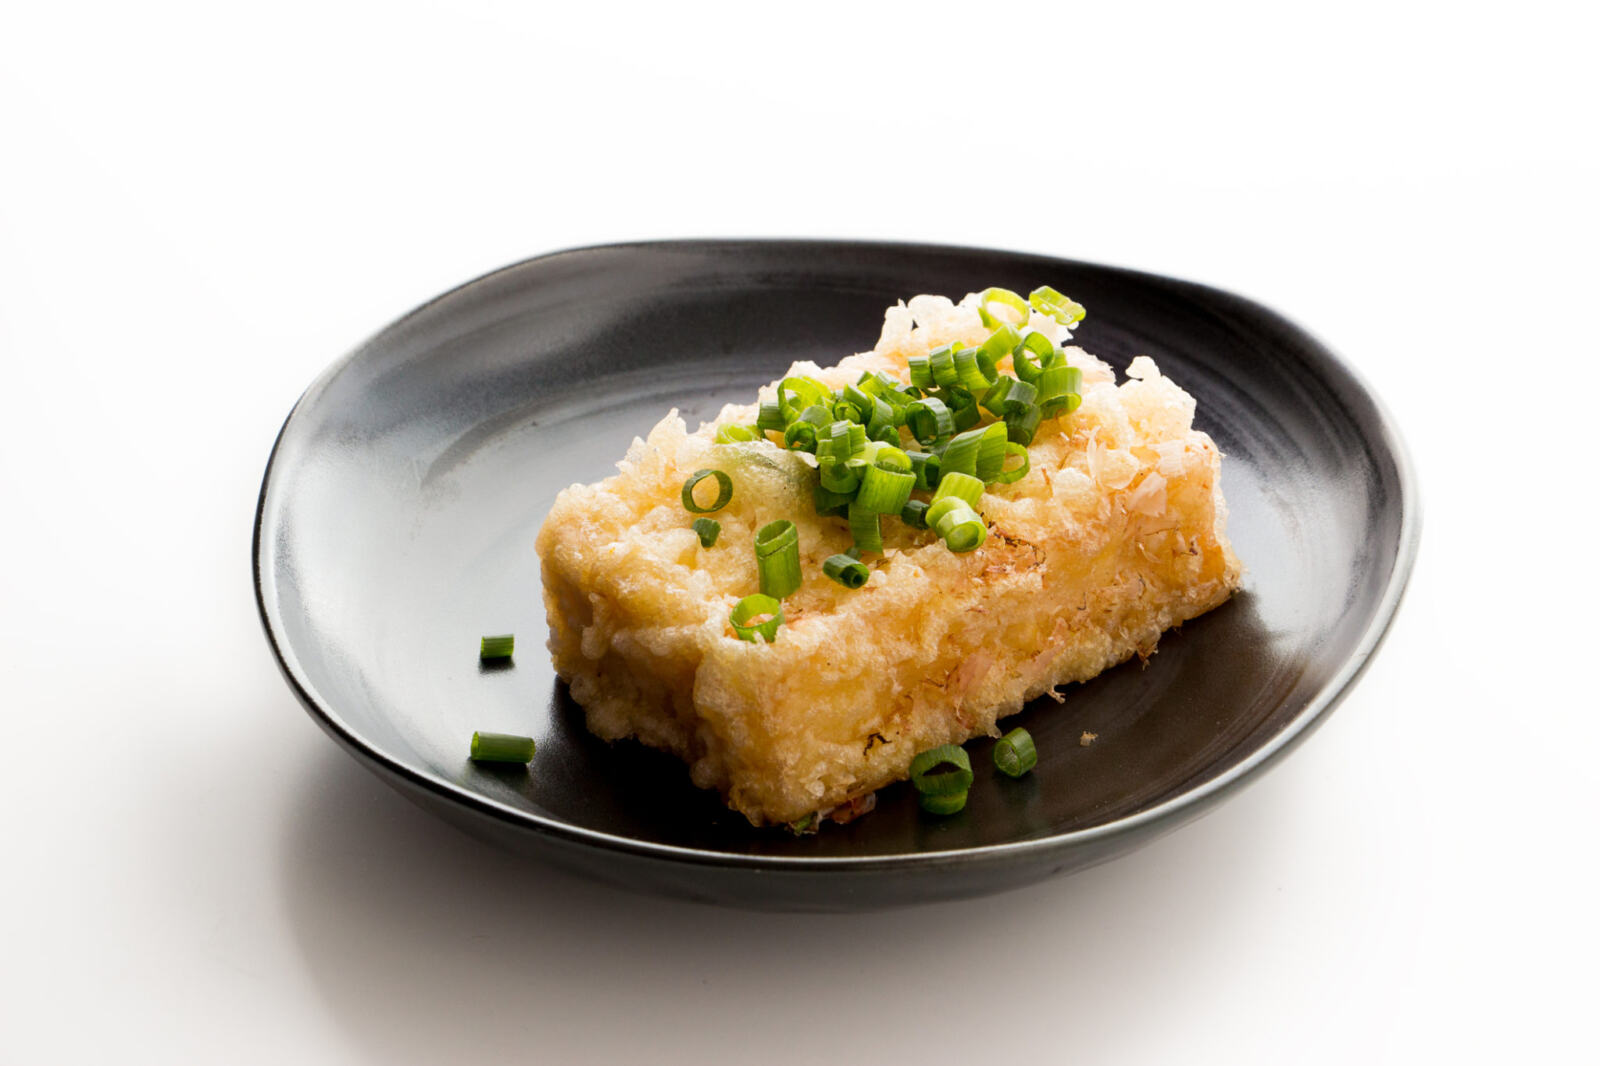 A plate of crispy fried Agedashi tofu, garnished with green onions and grated daikon, served with a side of dipping sauce.